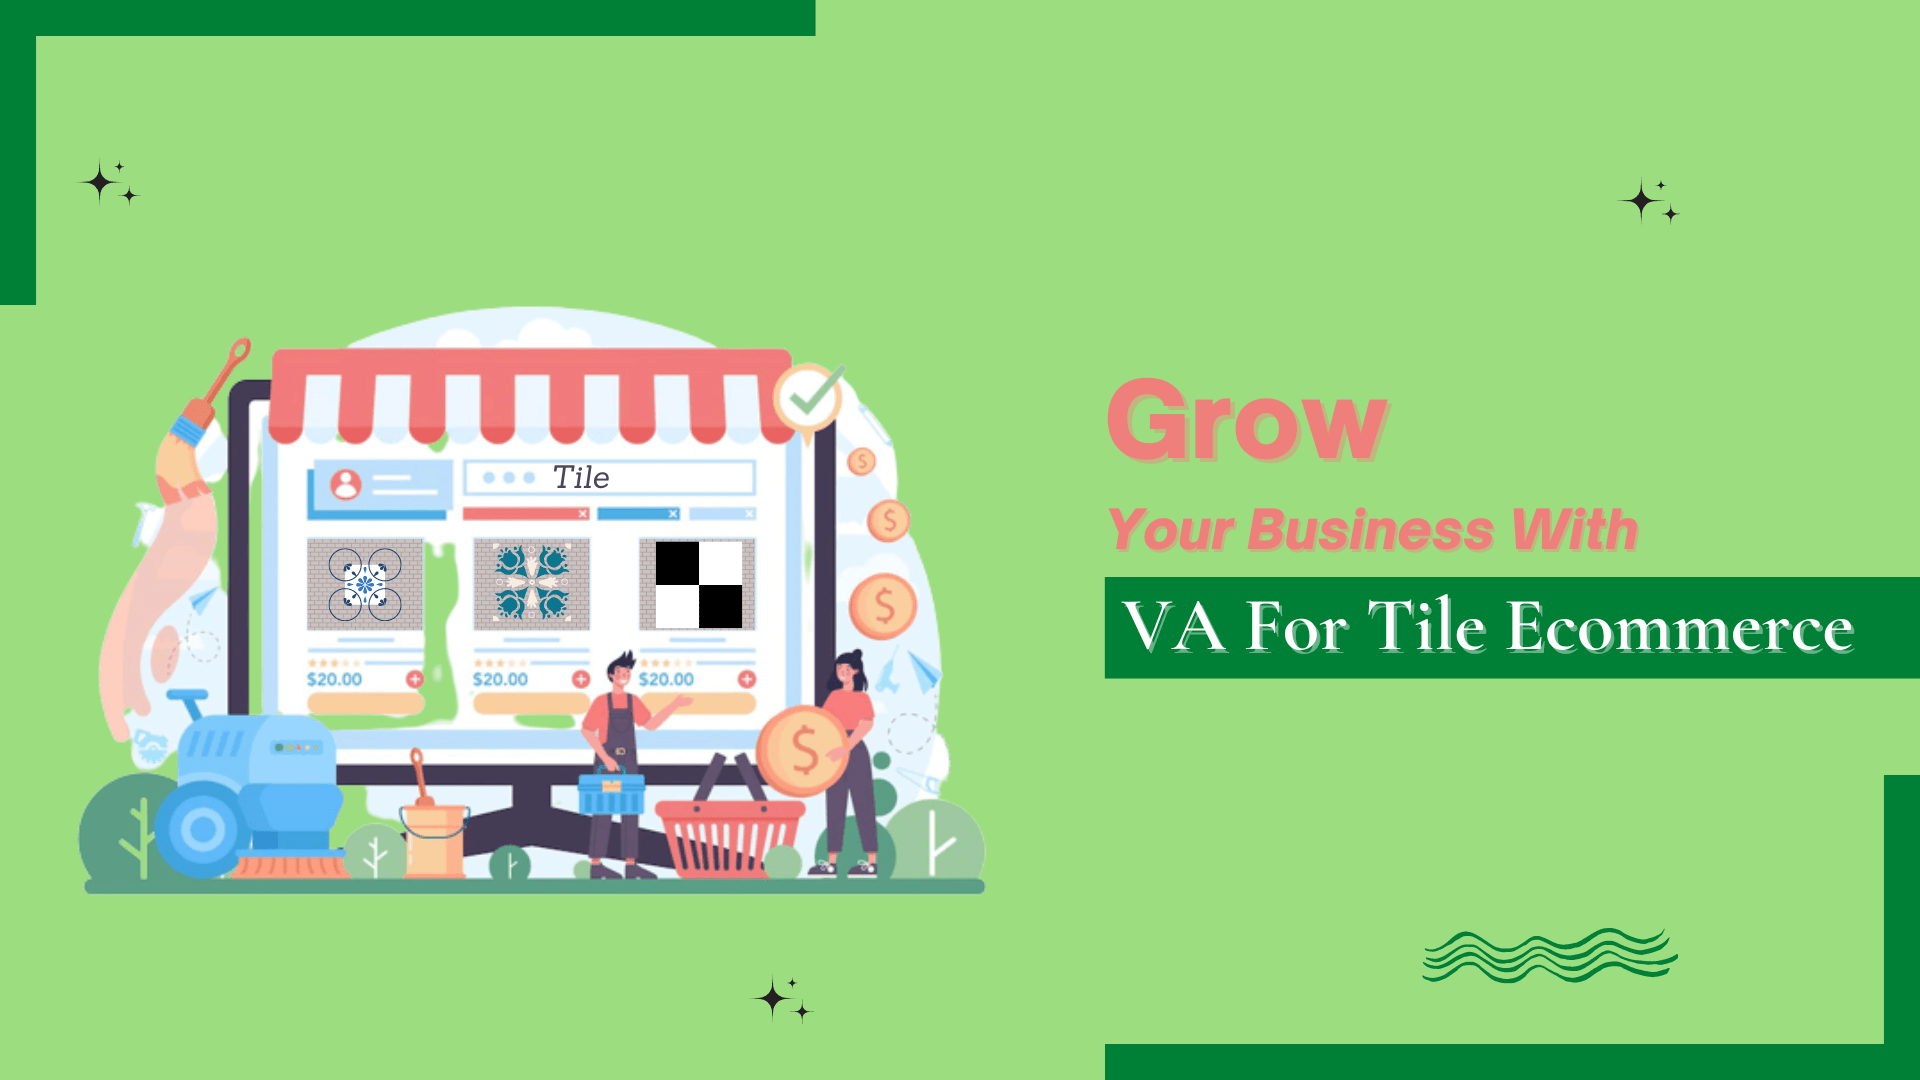 How to grow your business with a VA for tile e-commerce?